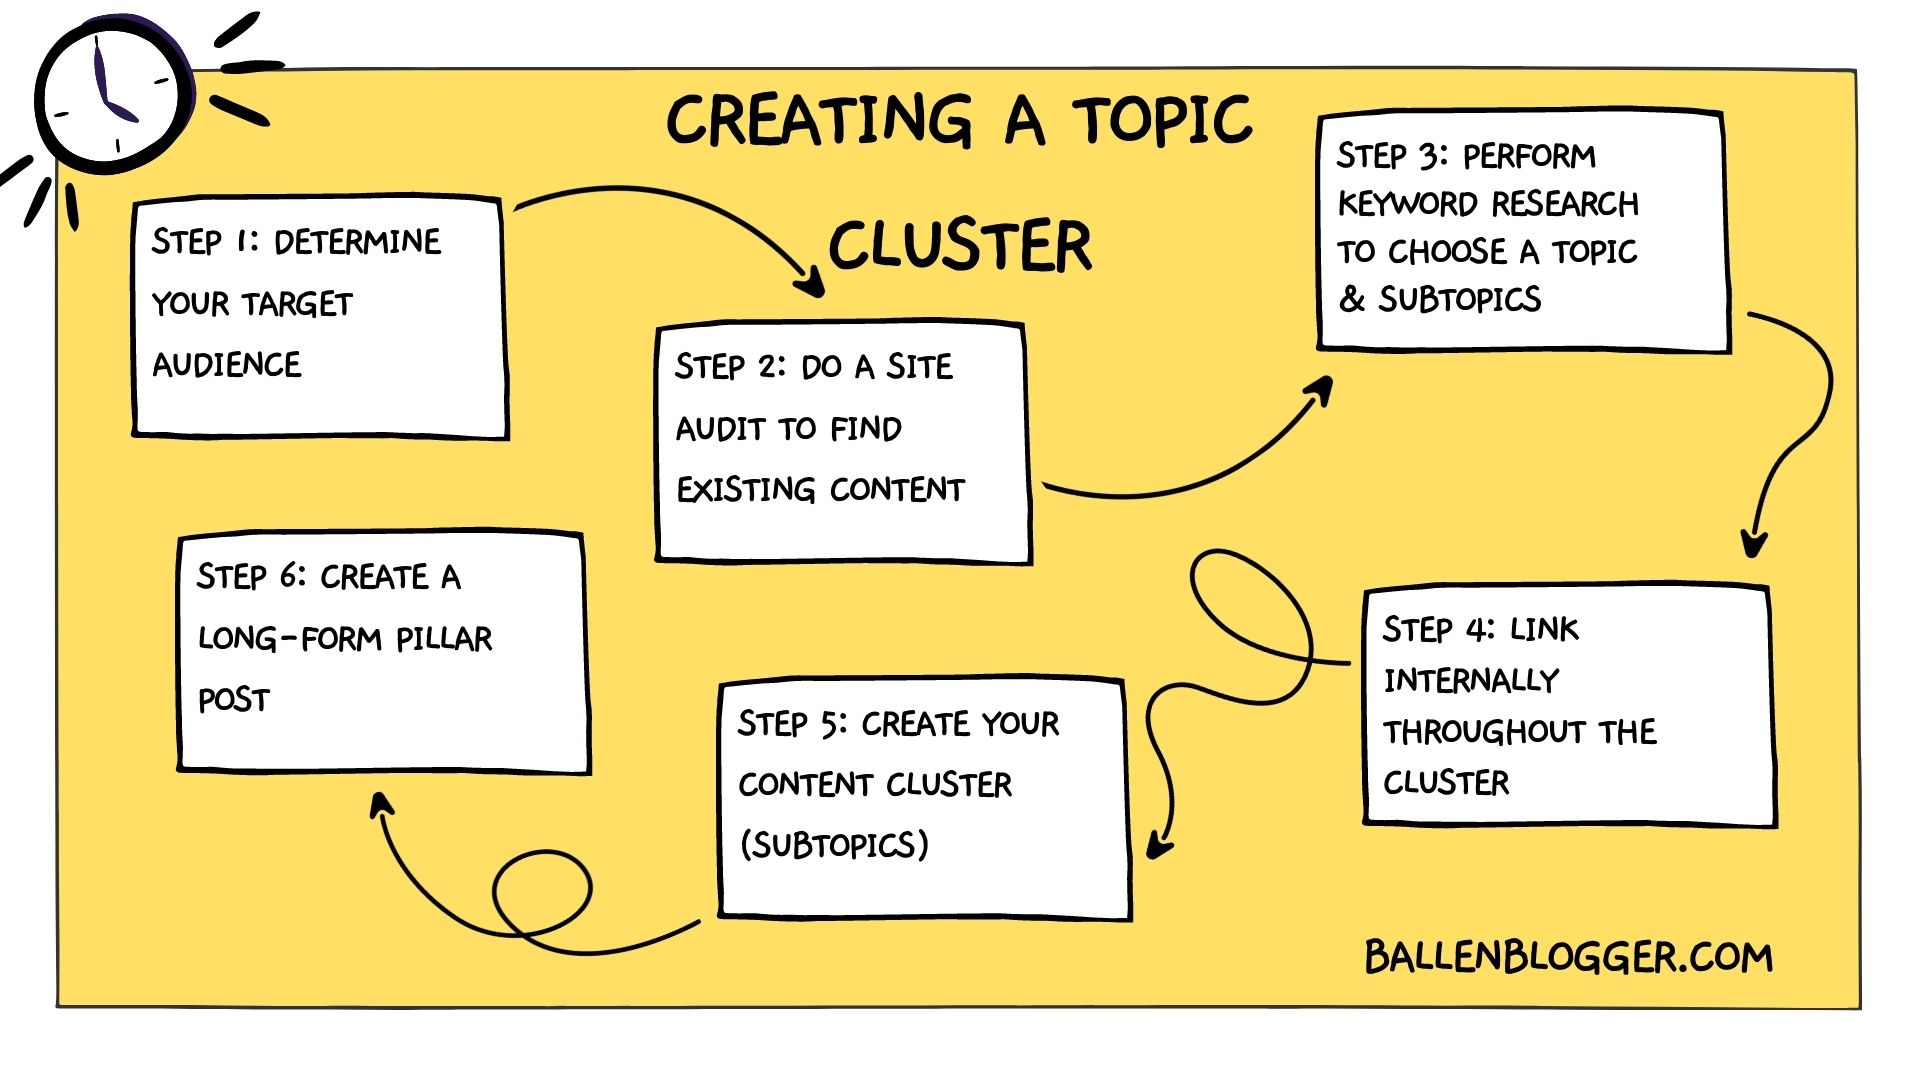 If done right, topic clusters can be the launching pad that moves your website to the top of the organic search rankings.